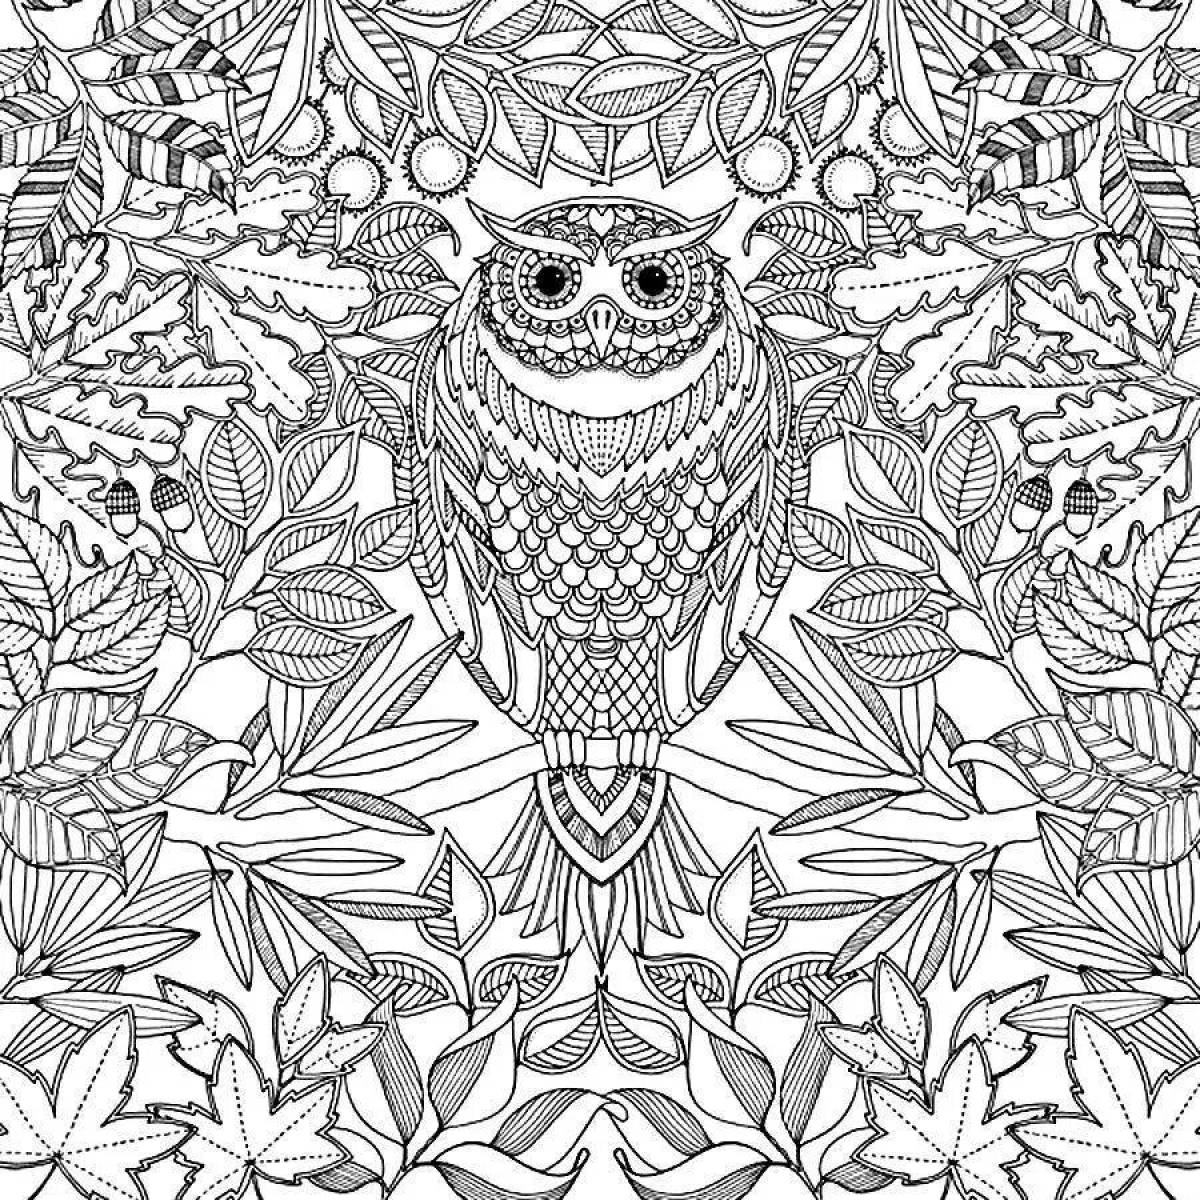 A fun anti-stress coloring book for adults